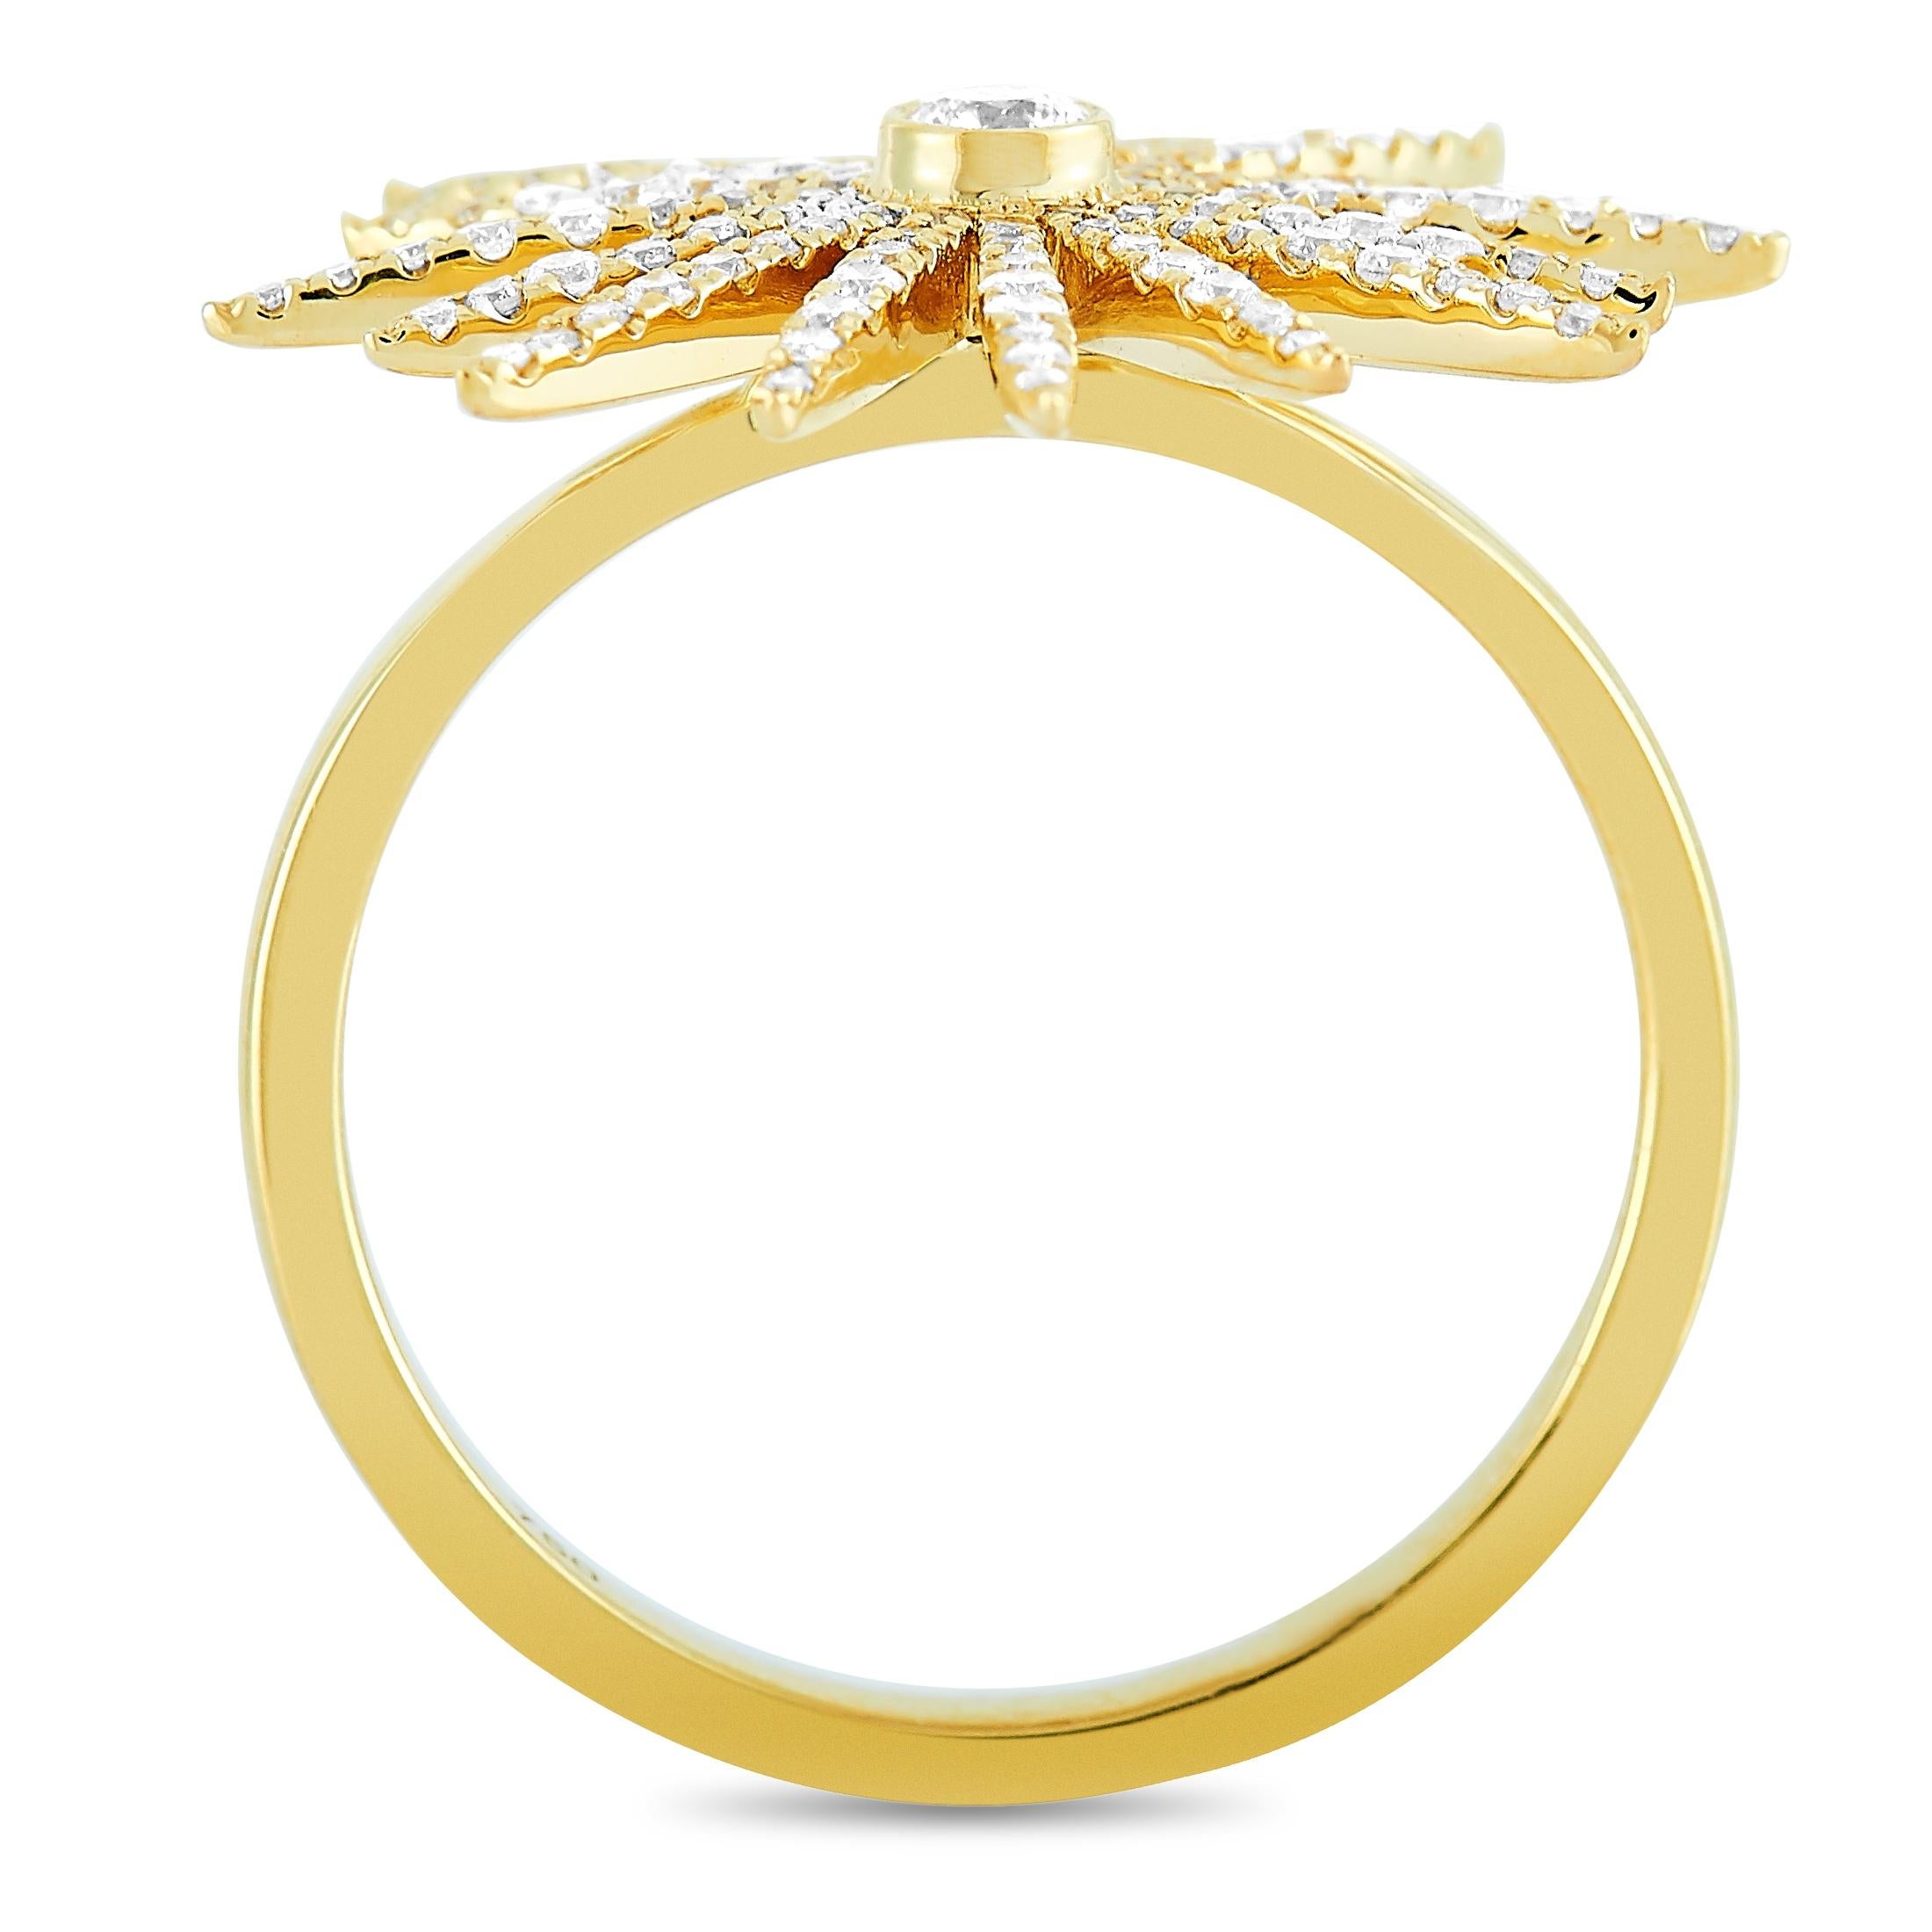 This LB Exclusive ring is crafted from 18K yellow gold and weighs 4 grams. It boasts band thickness of 2 mm and top height of 4 mm, while top dimensions measure 20 by 20 mm. The ring is set with diamonds that total 0.45 carats.
 
 Offered in brand